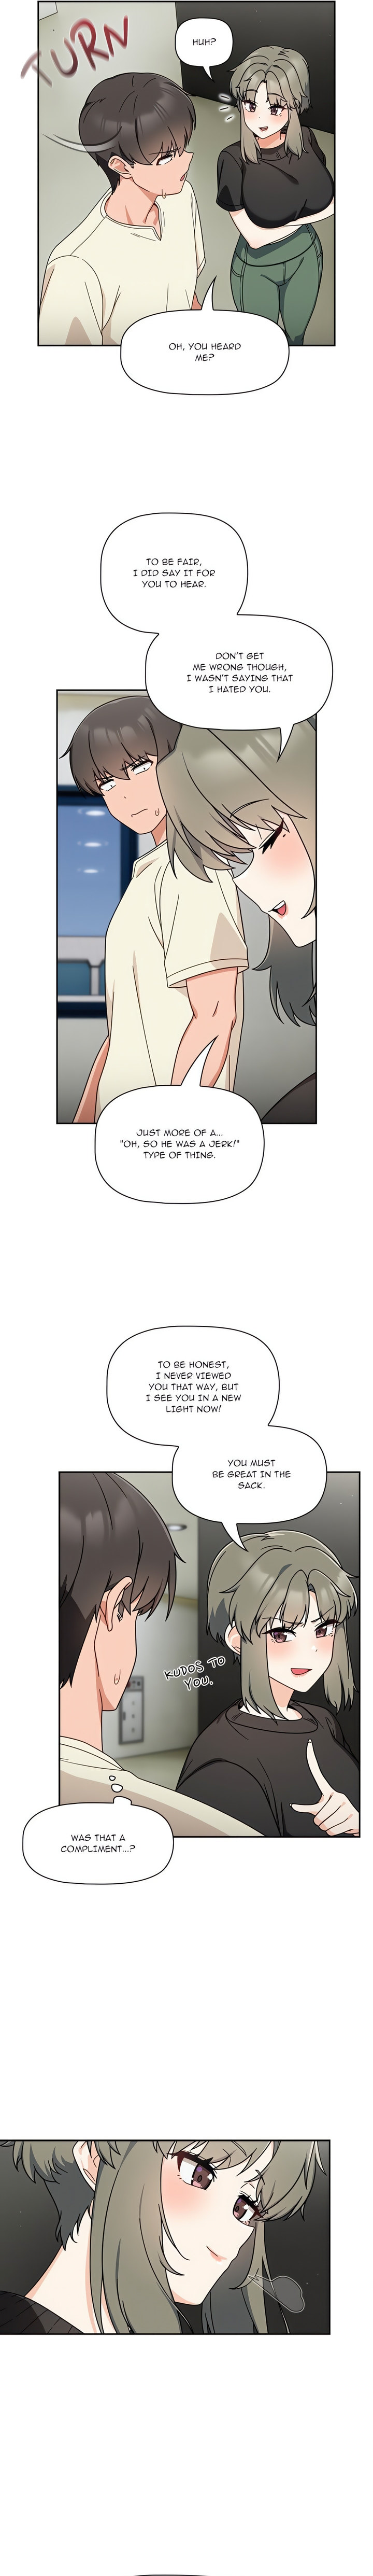 #Follow Me - Chapter 32 Page 9